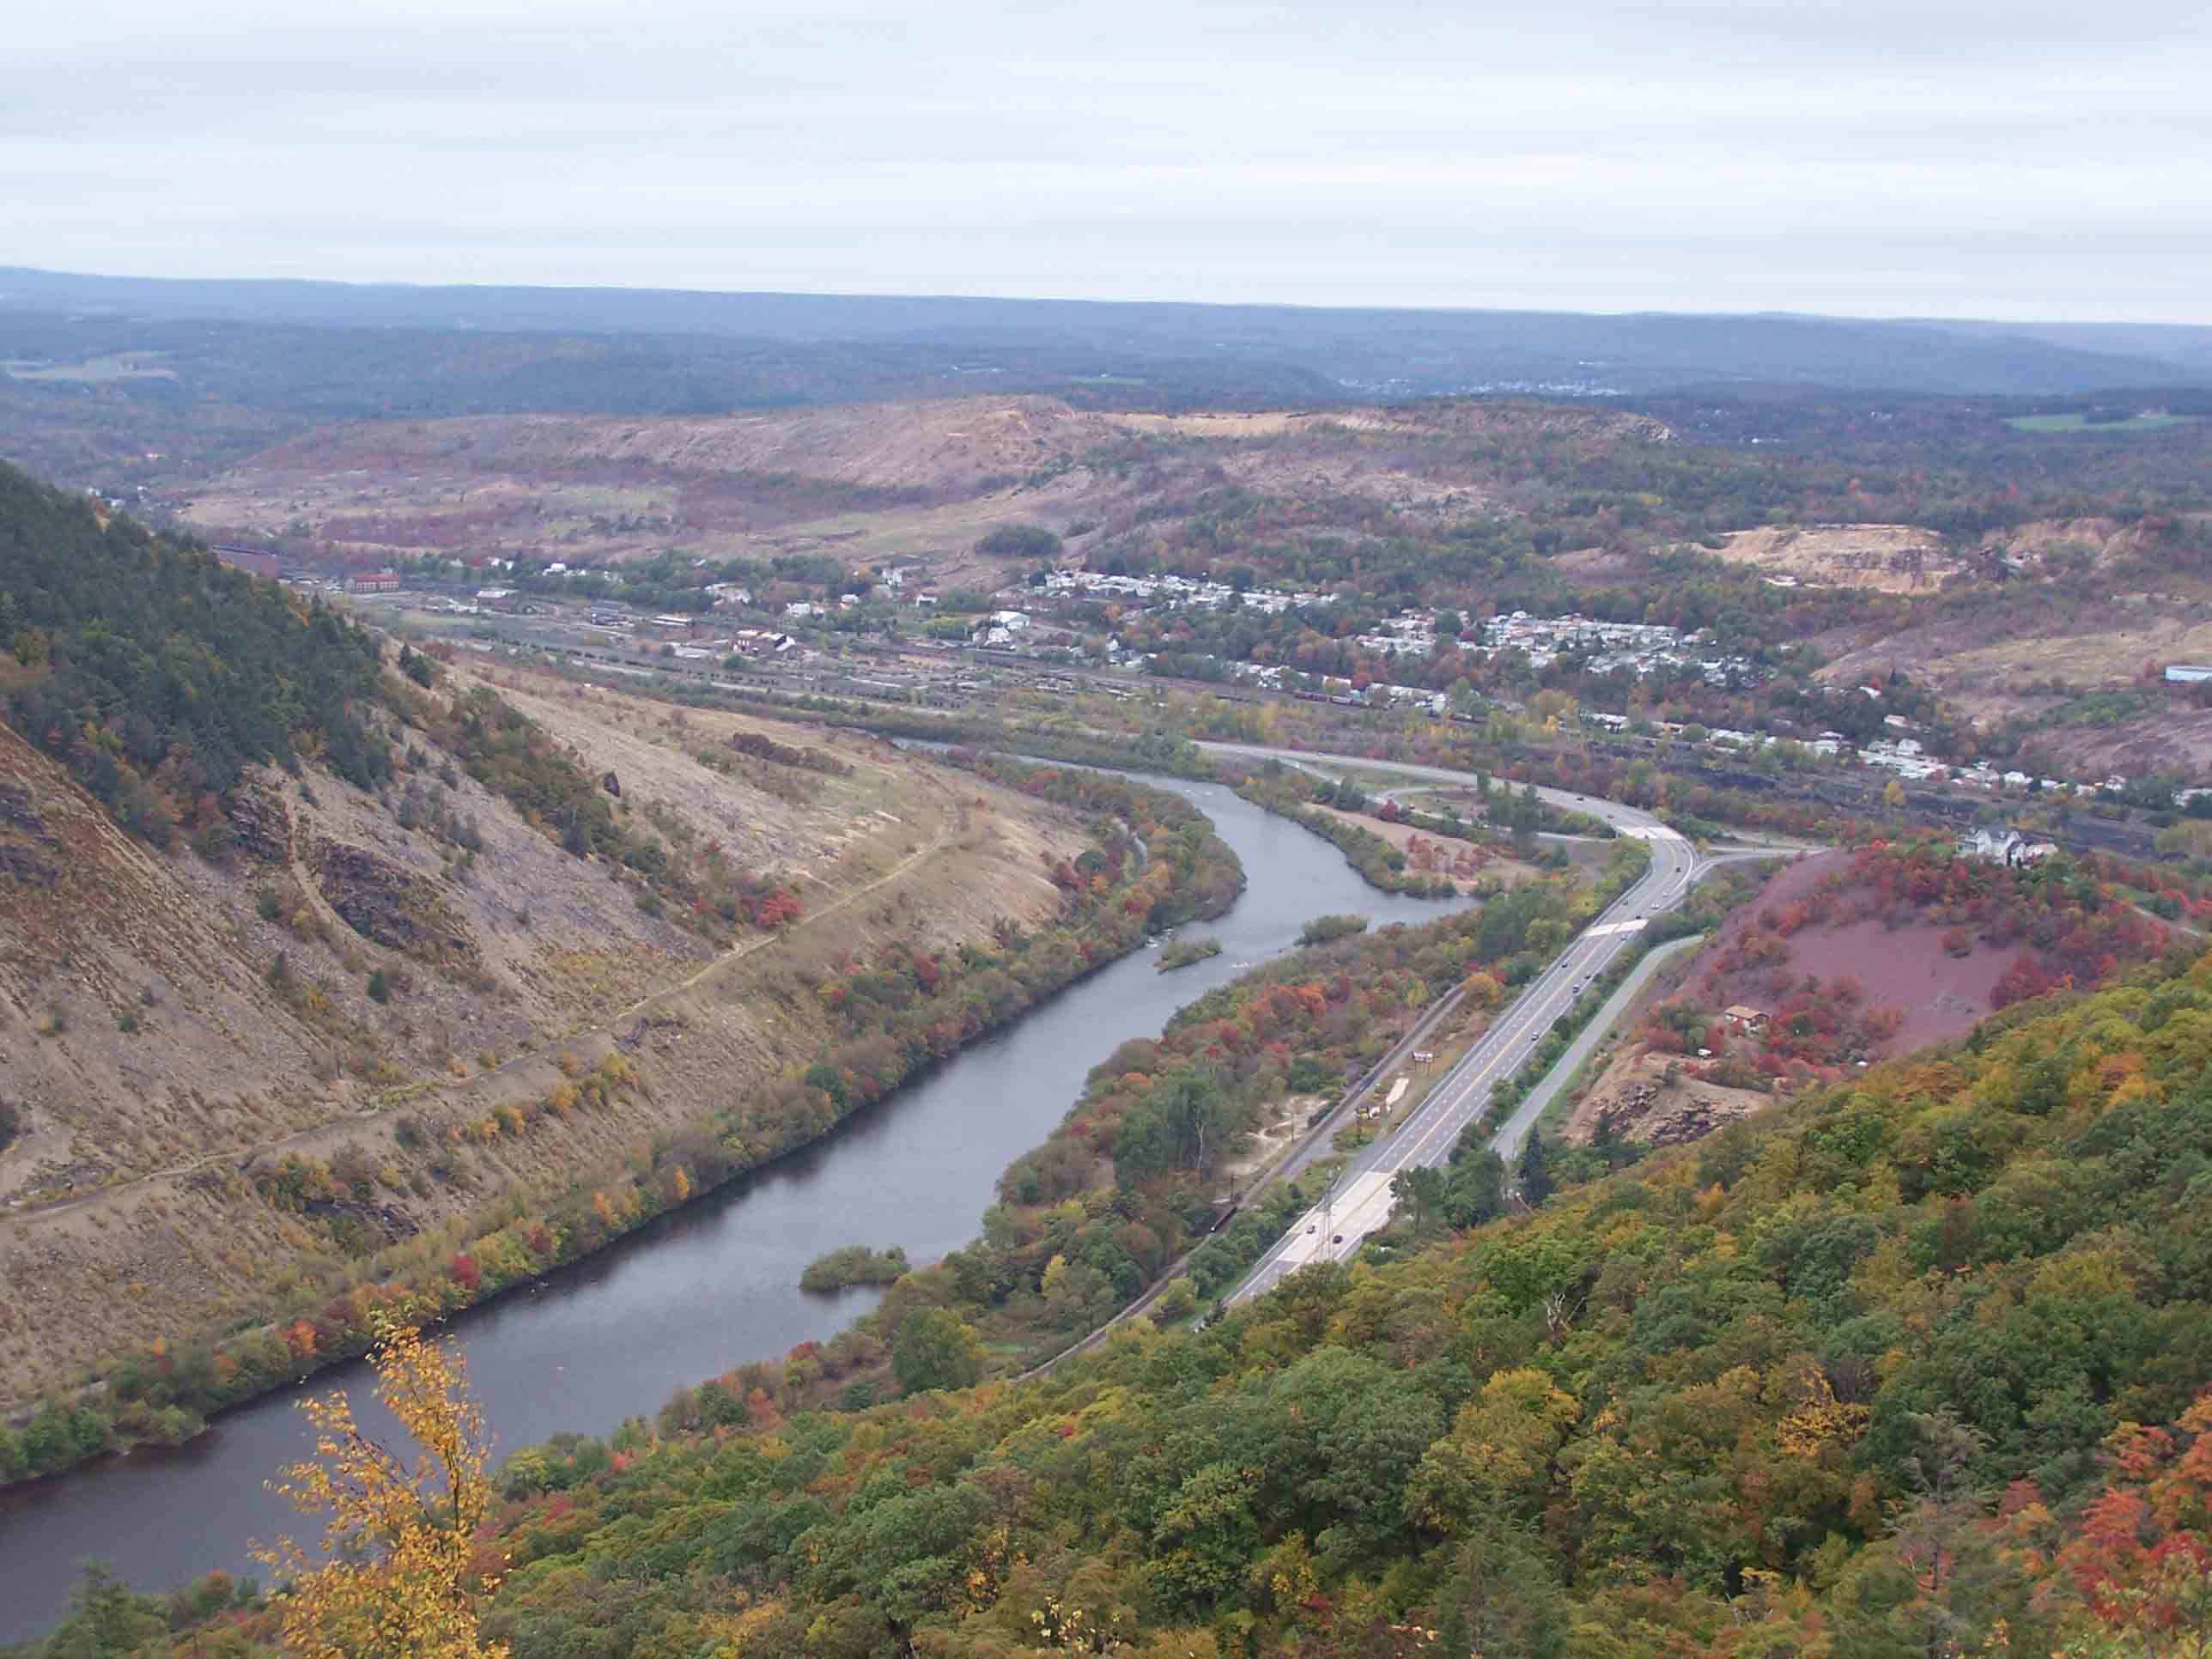 mm 19.5: View of Lehigh Gap. Courtesy at@rohland.org